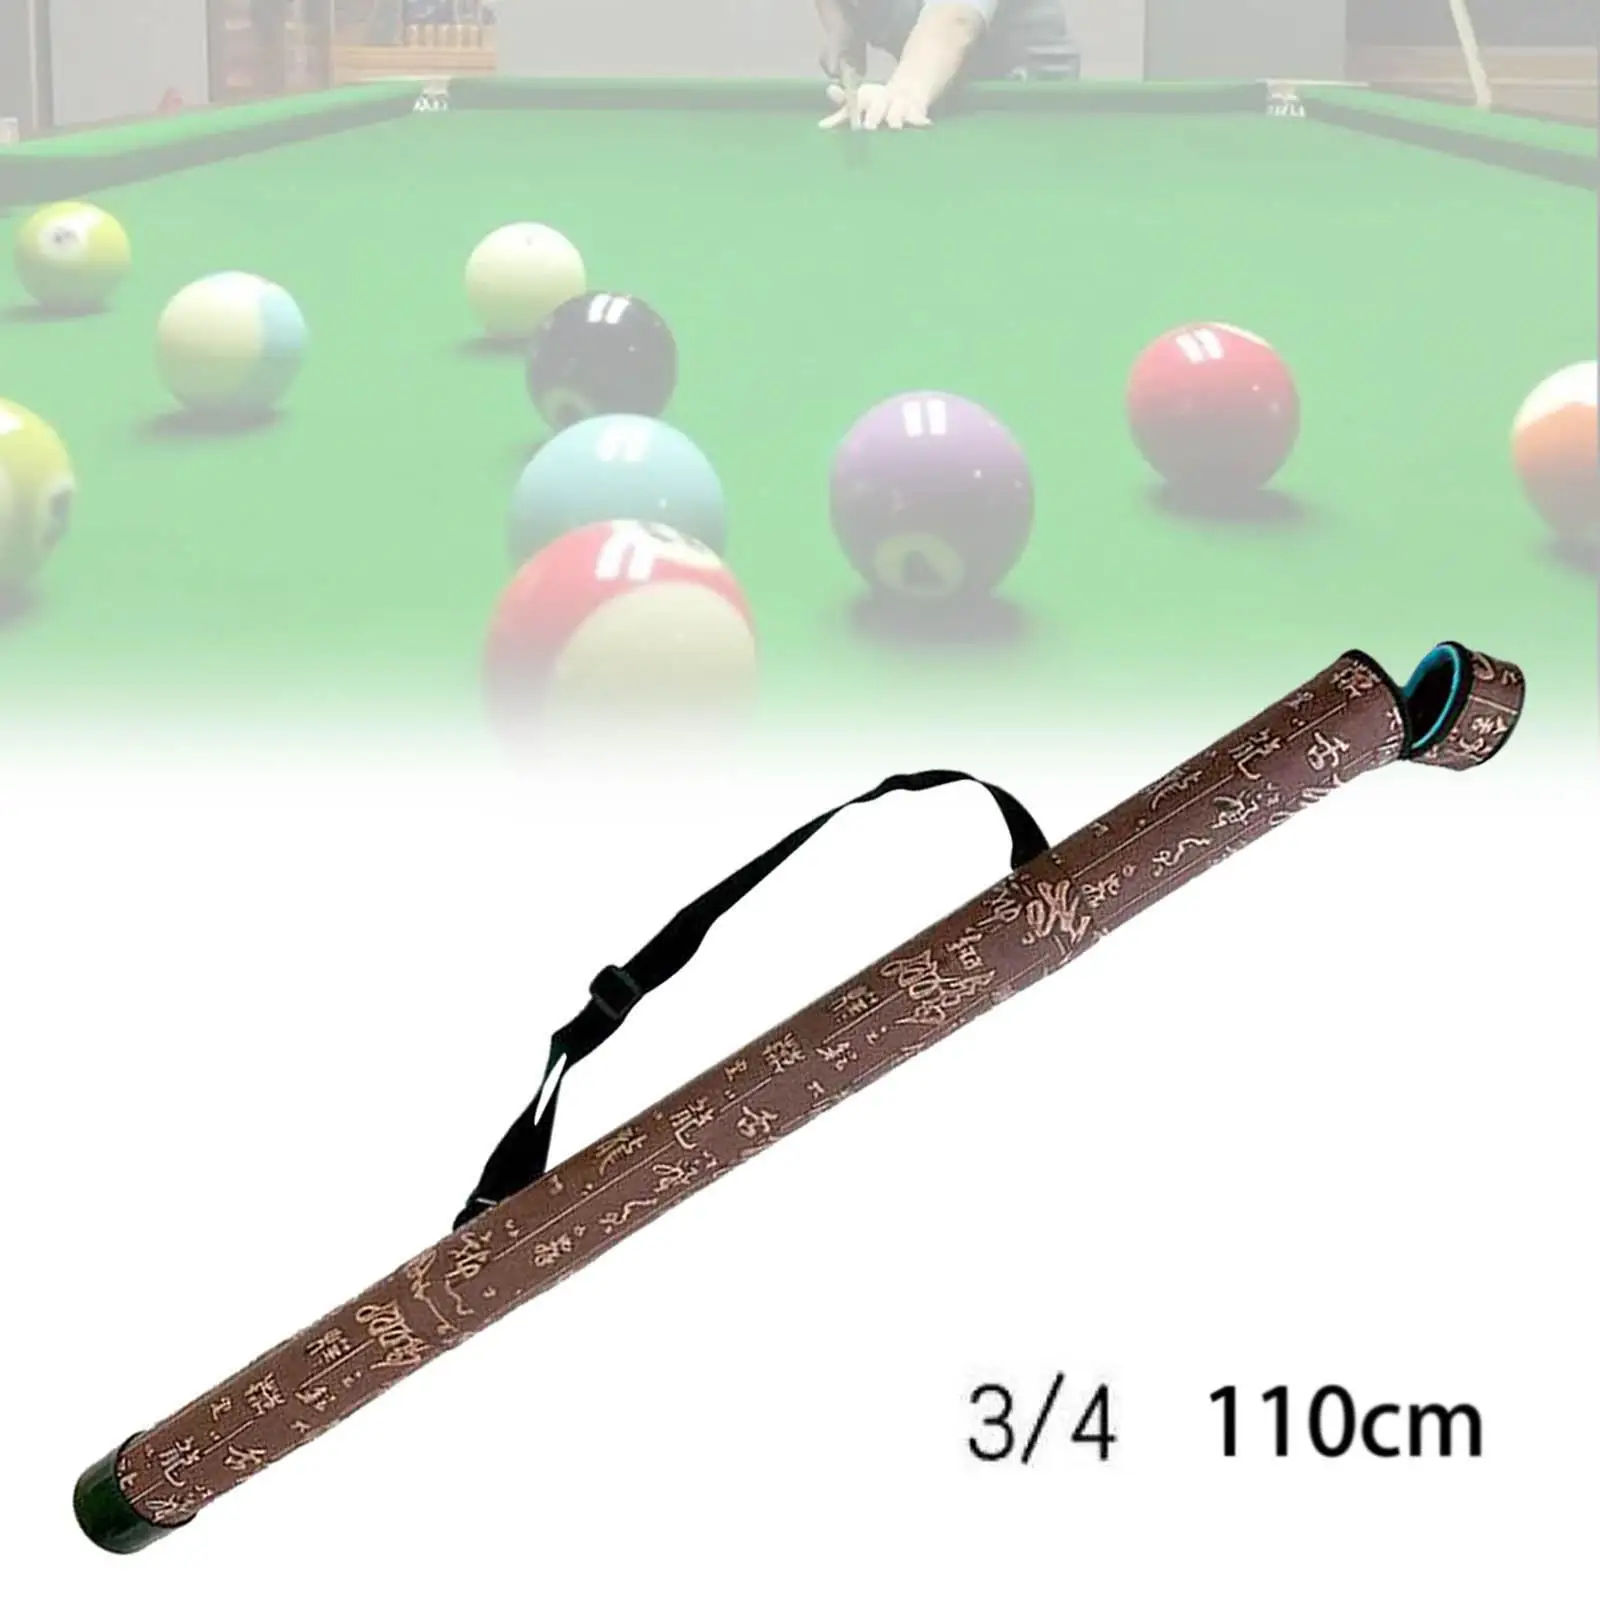 Billiards Pool Cue Case Jointed Snooker Organizer with Accessory Pouch